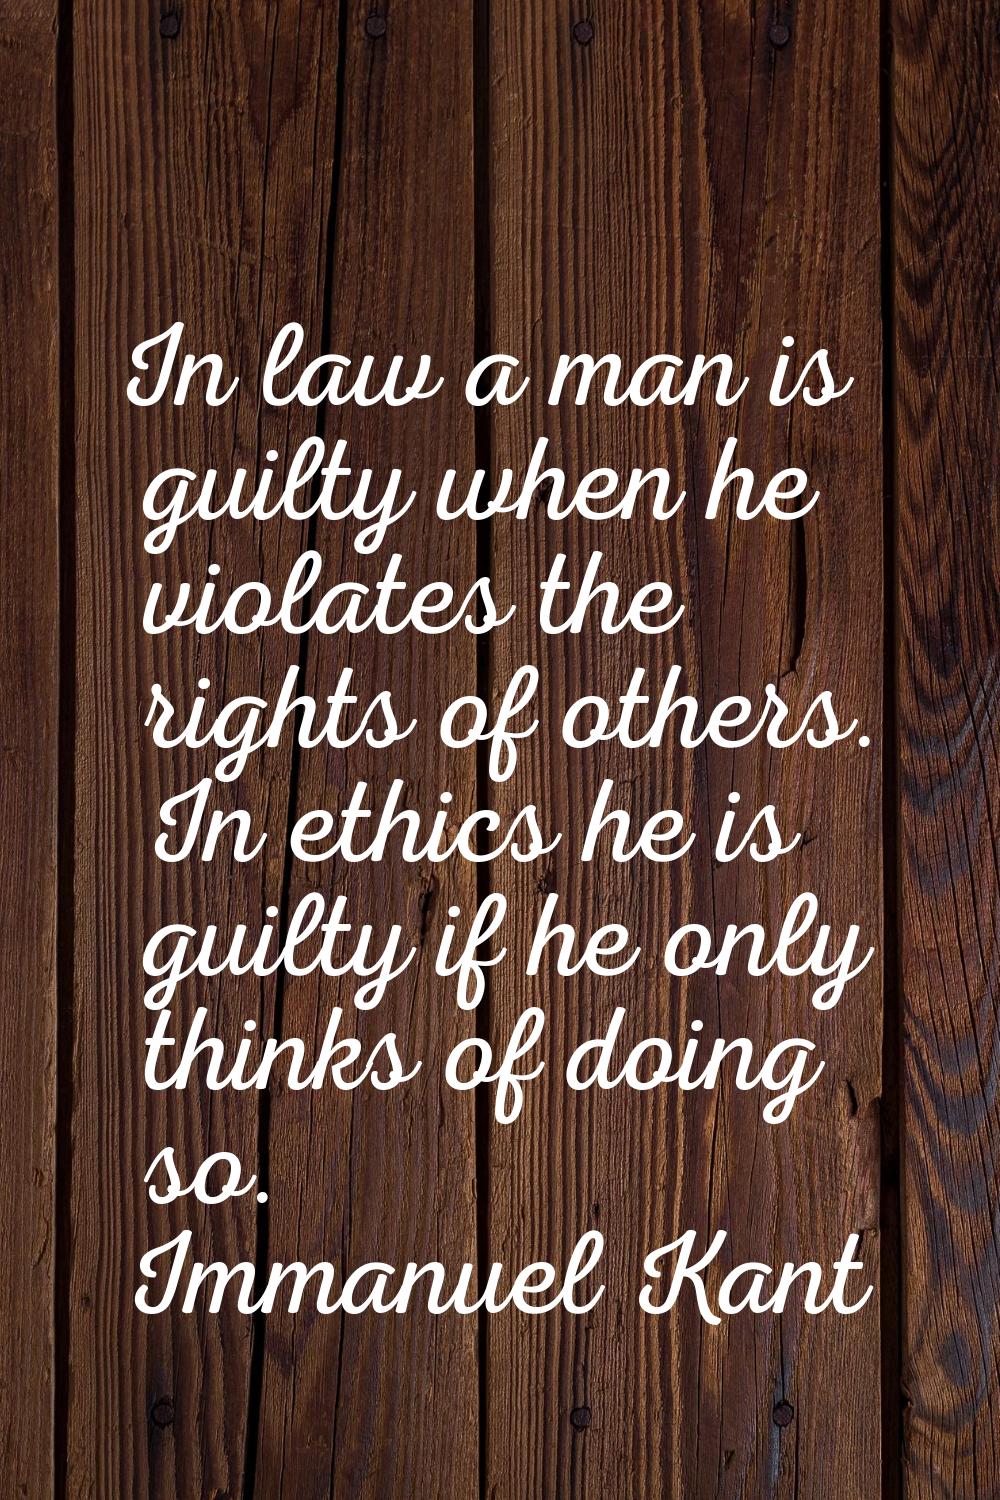 In law a man is guilty when he violates the rights of others. In ethics he is guilty if he only thi